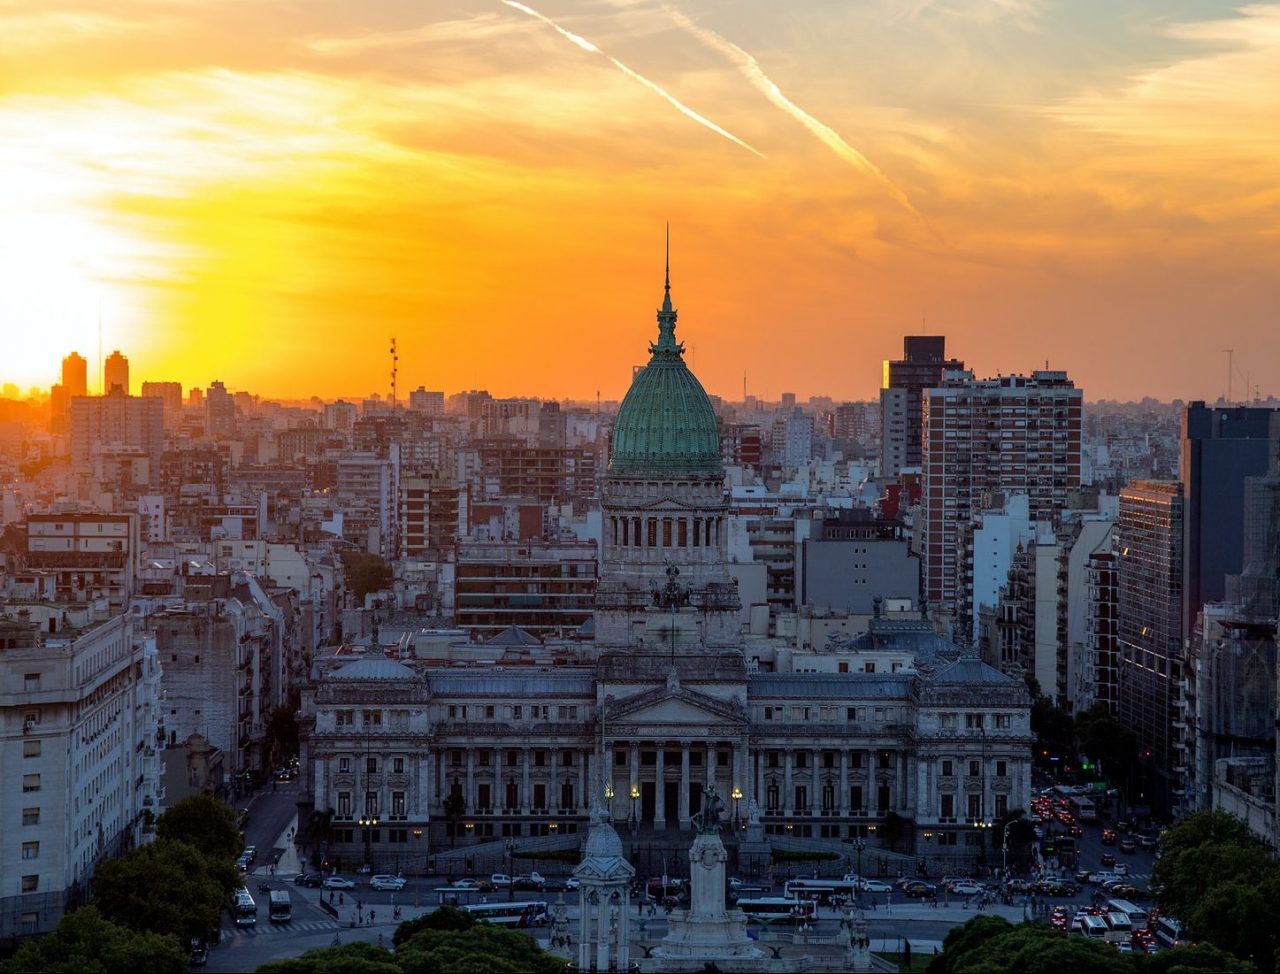 Buenos Aires at sunset